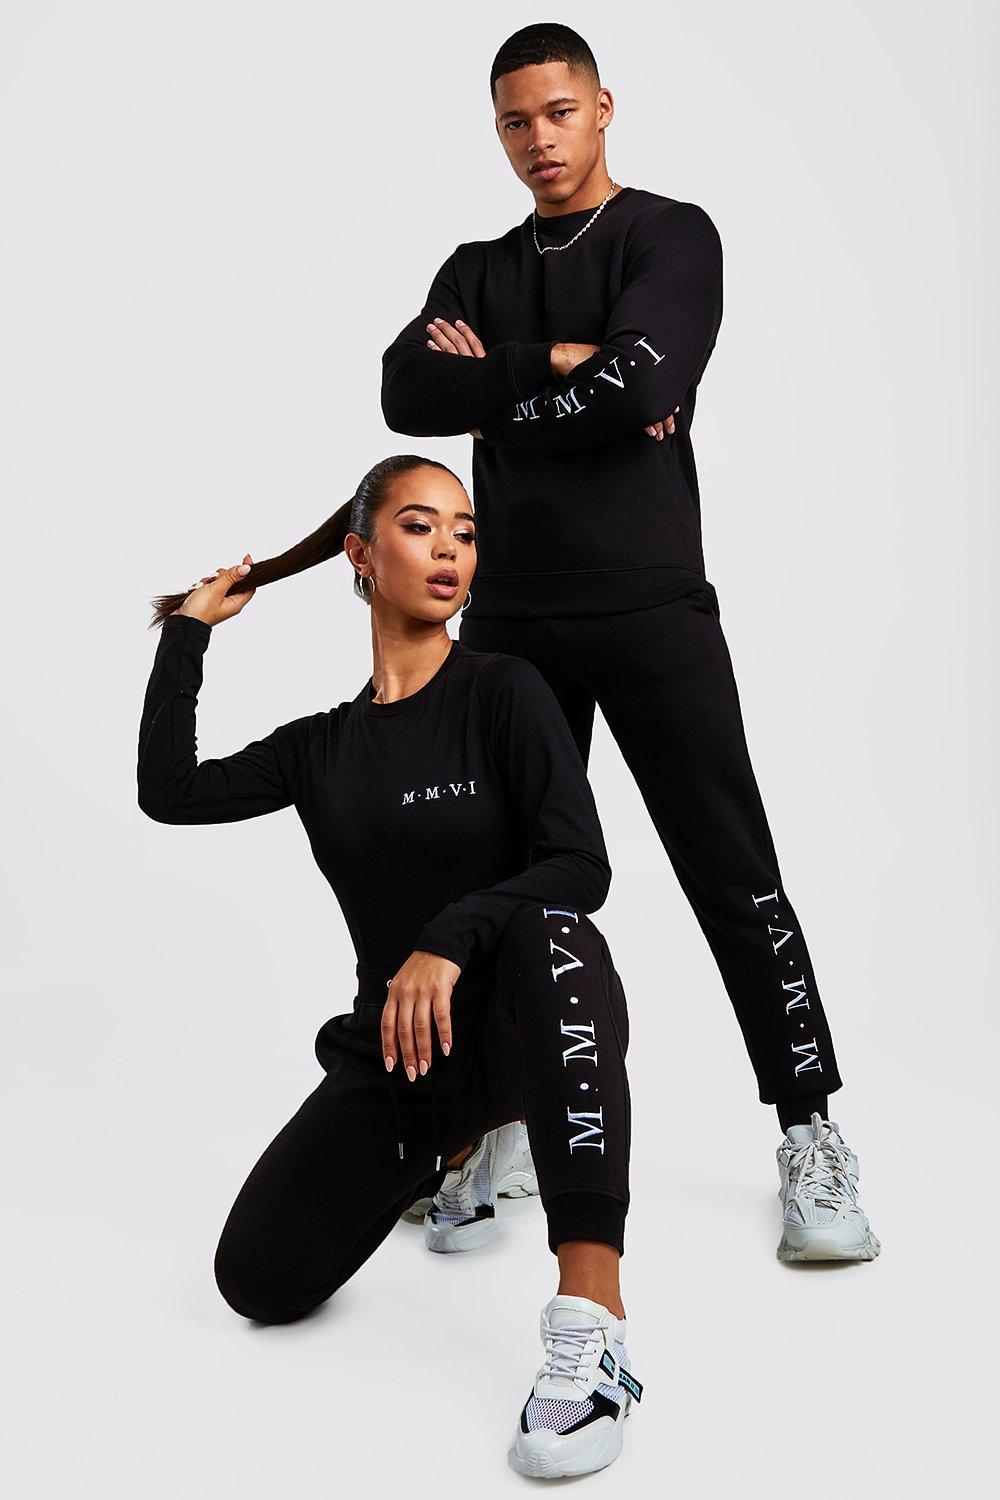 his and hers adidas outfits